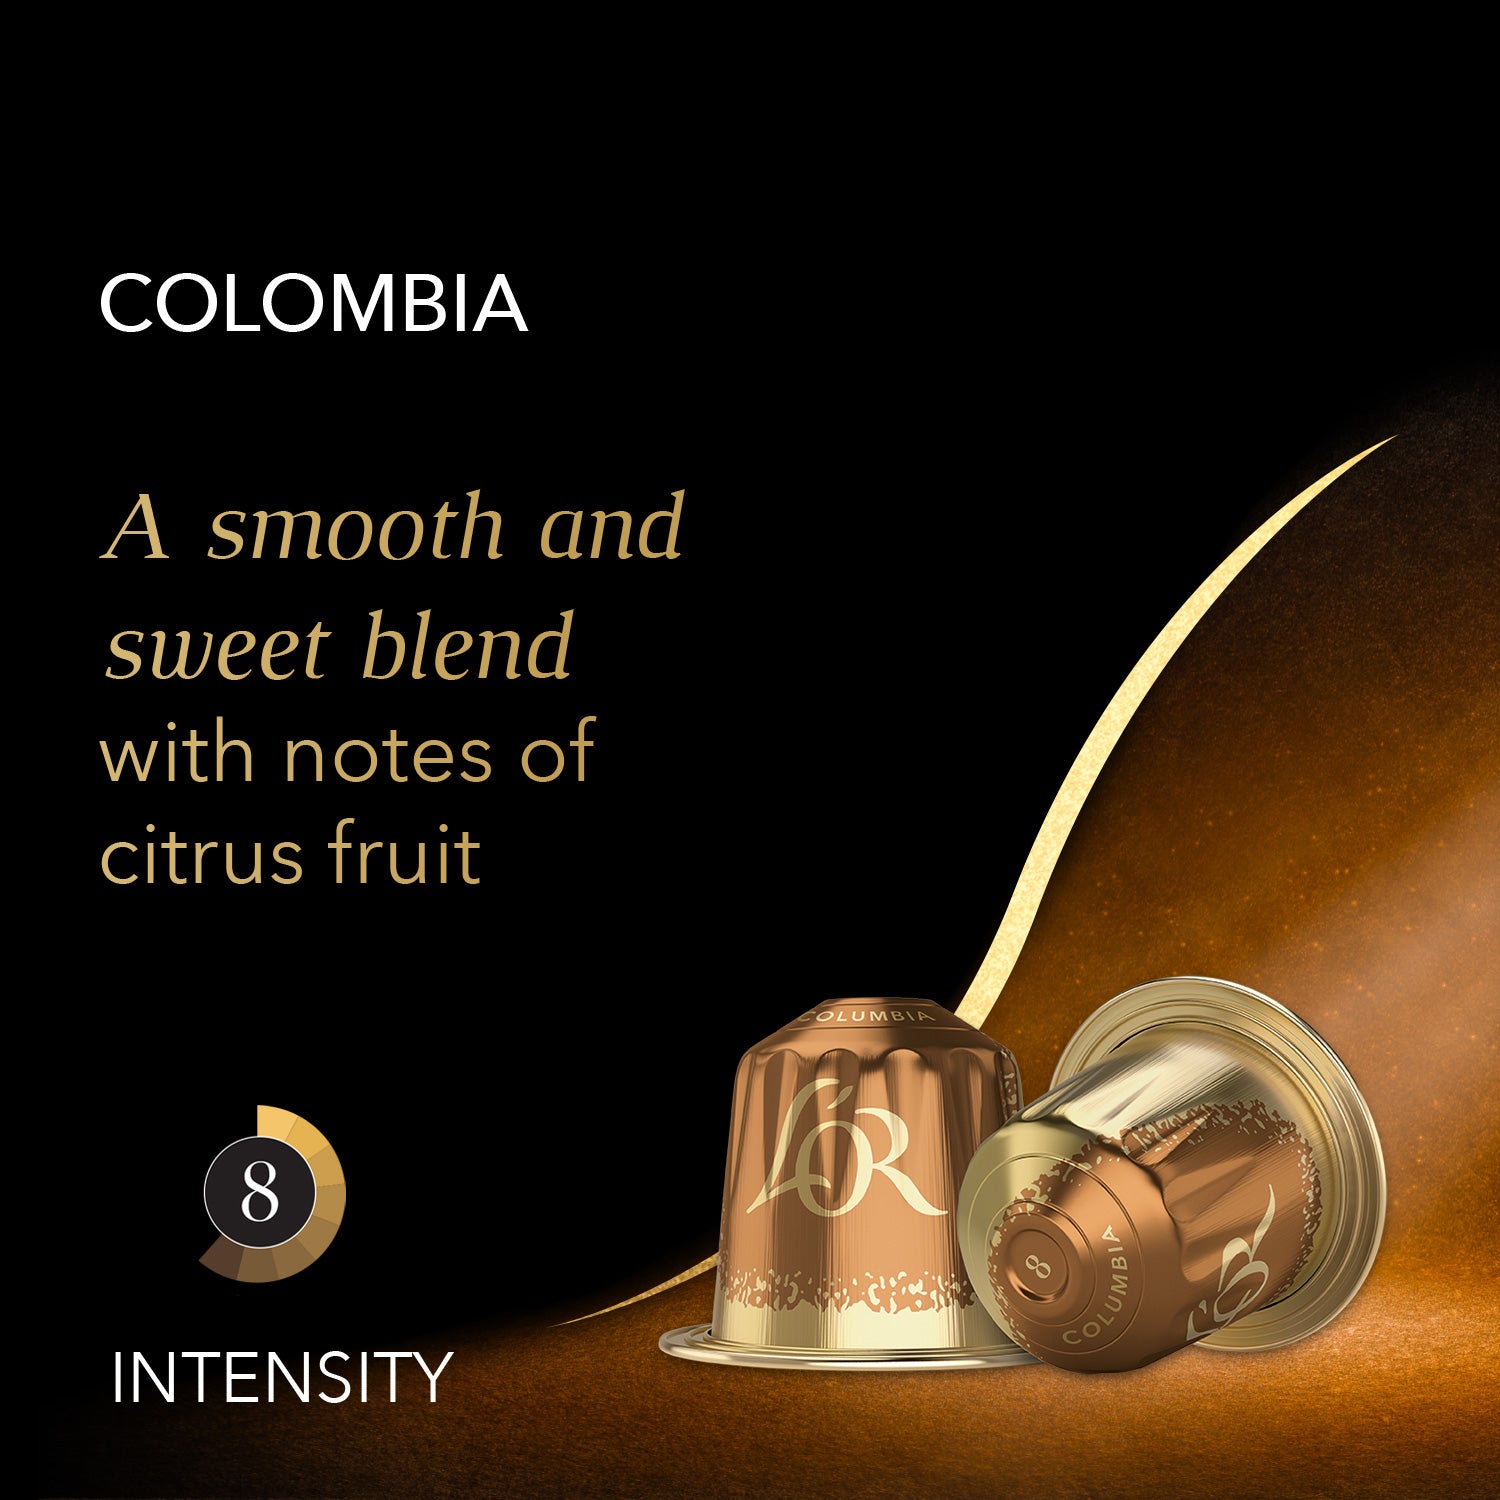 A smooth, sweet blend with notes of citrus fruit.